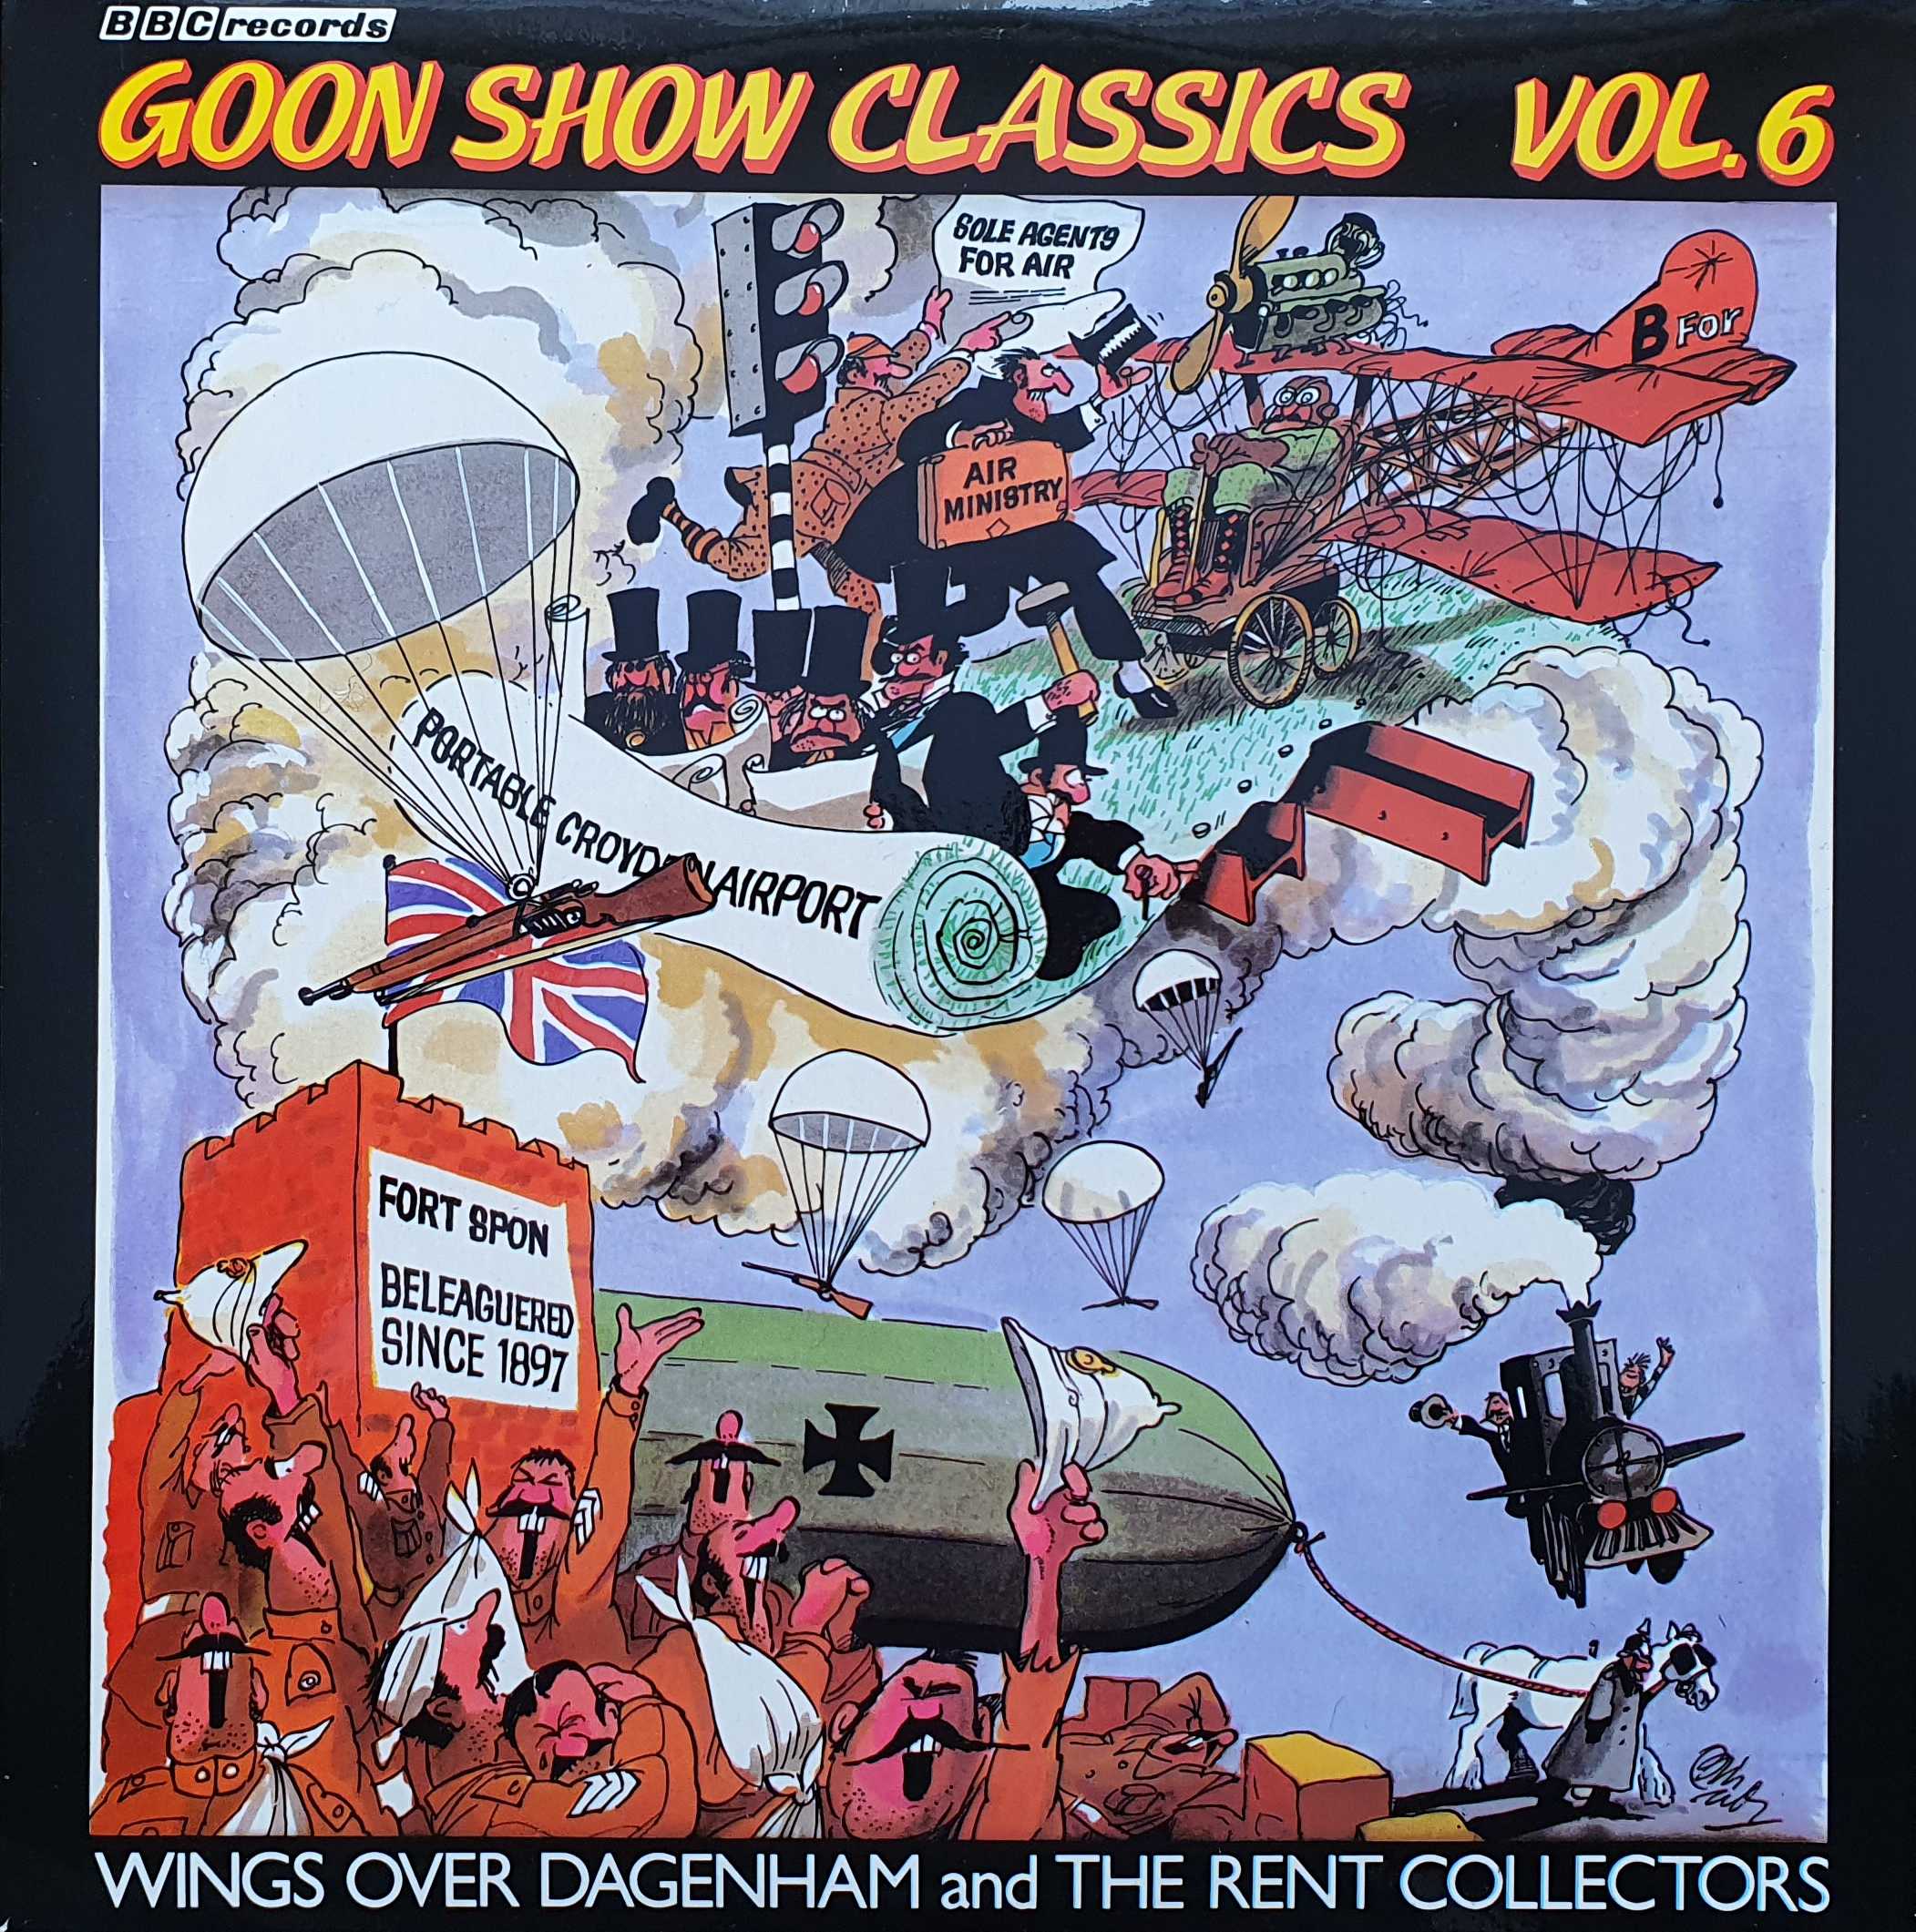 Picture of 2964 050 Goon Show classics vol. 6 (Australian import) by artist The Goon Show from the BBC albums - Records and Tapes library